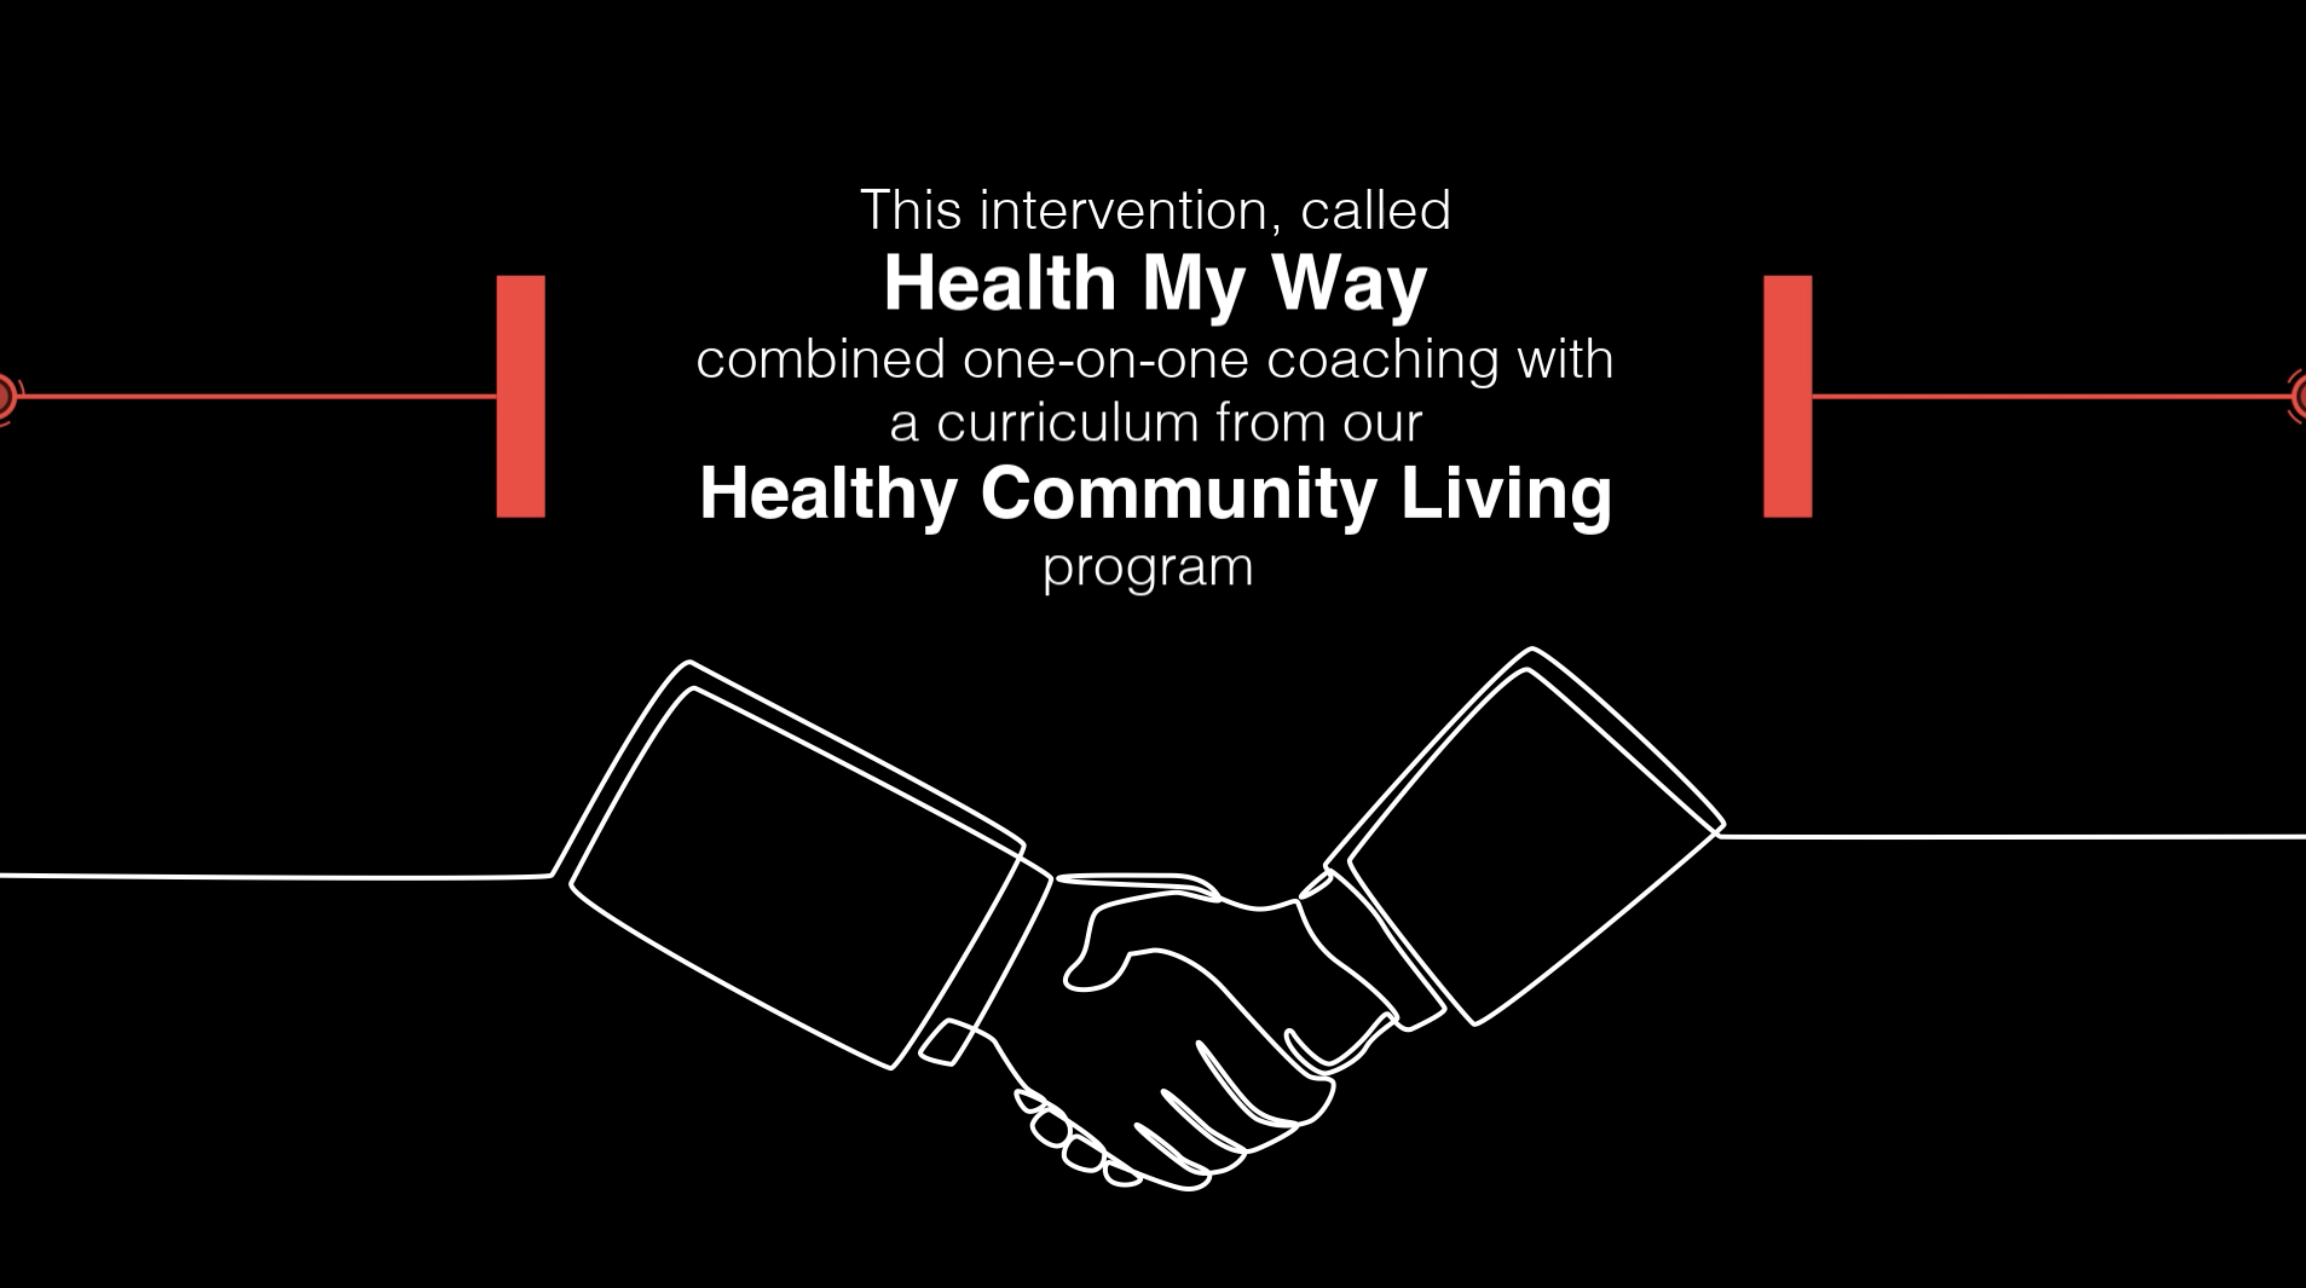 Screen shot of video image. Text: This intervention, called Health my Way combined one-on-one coaching with a curriculum from our Healthy Community Living program. 